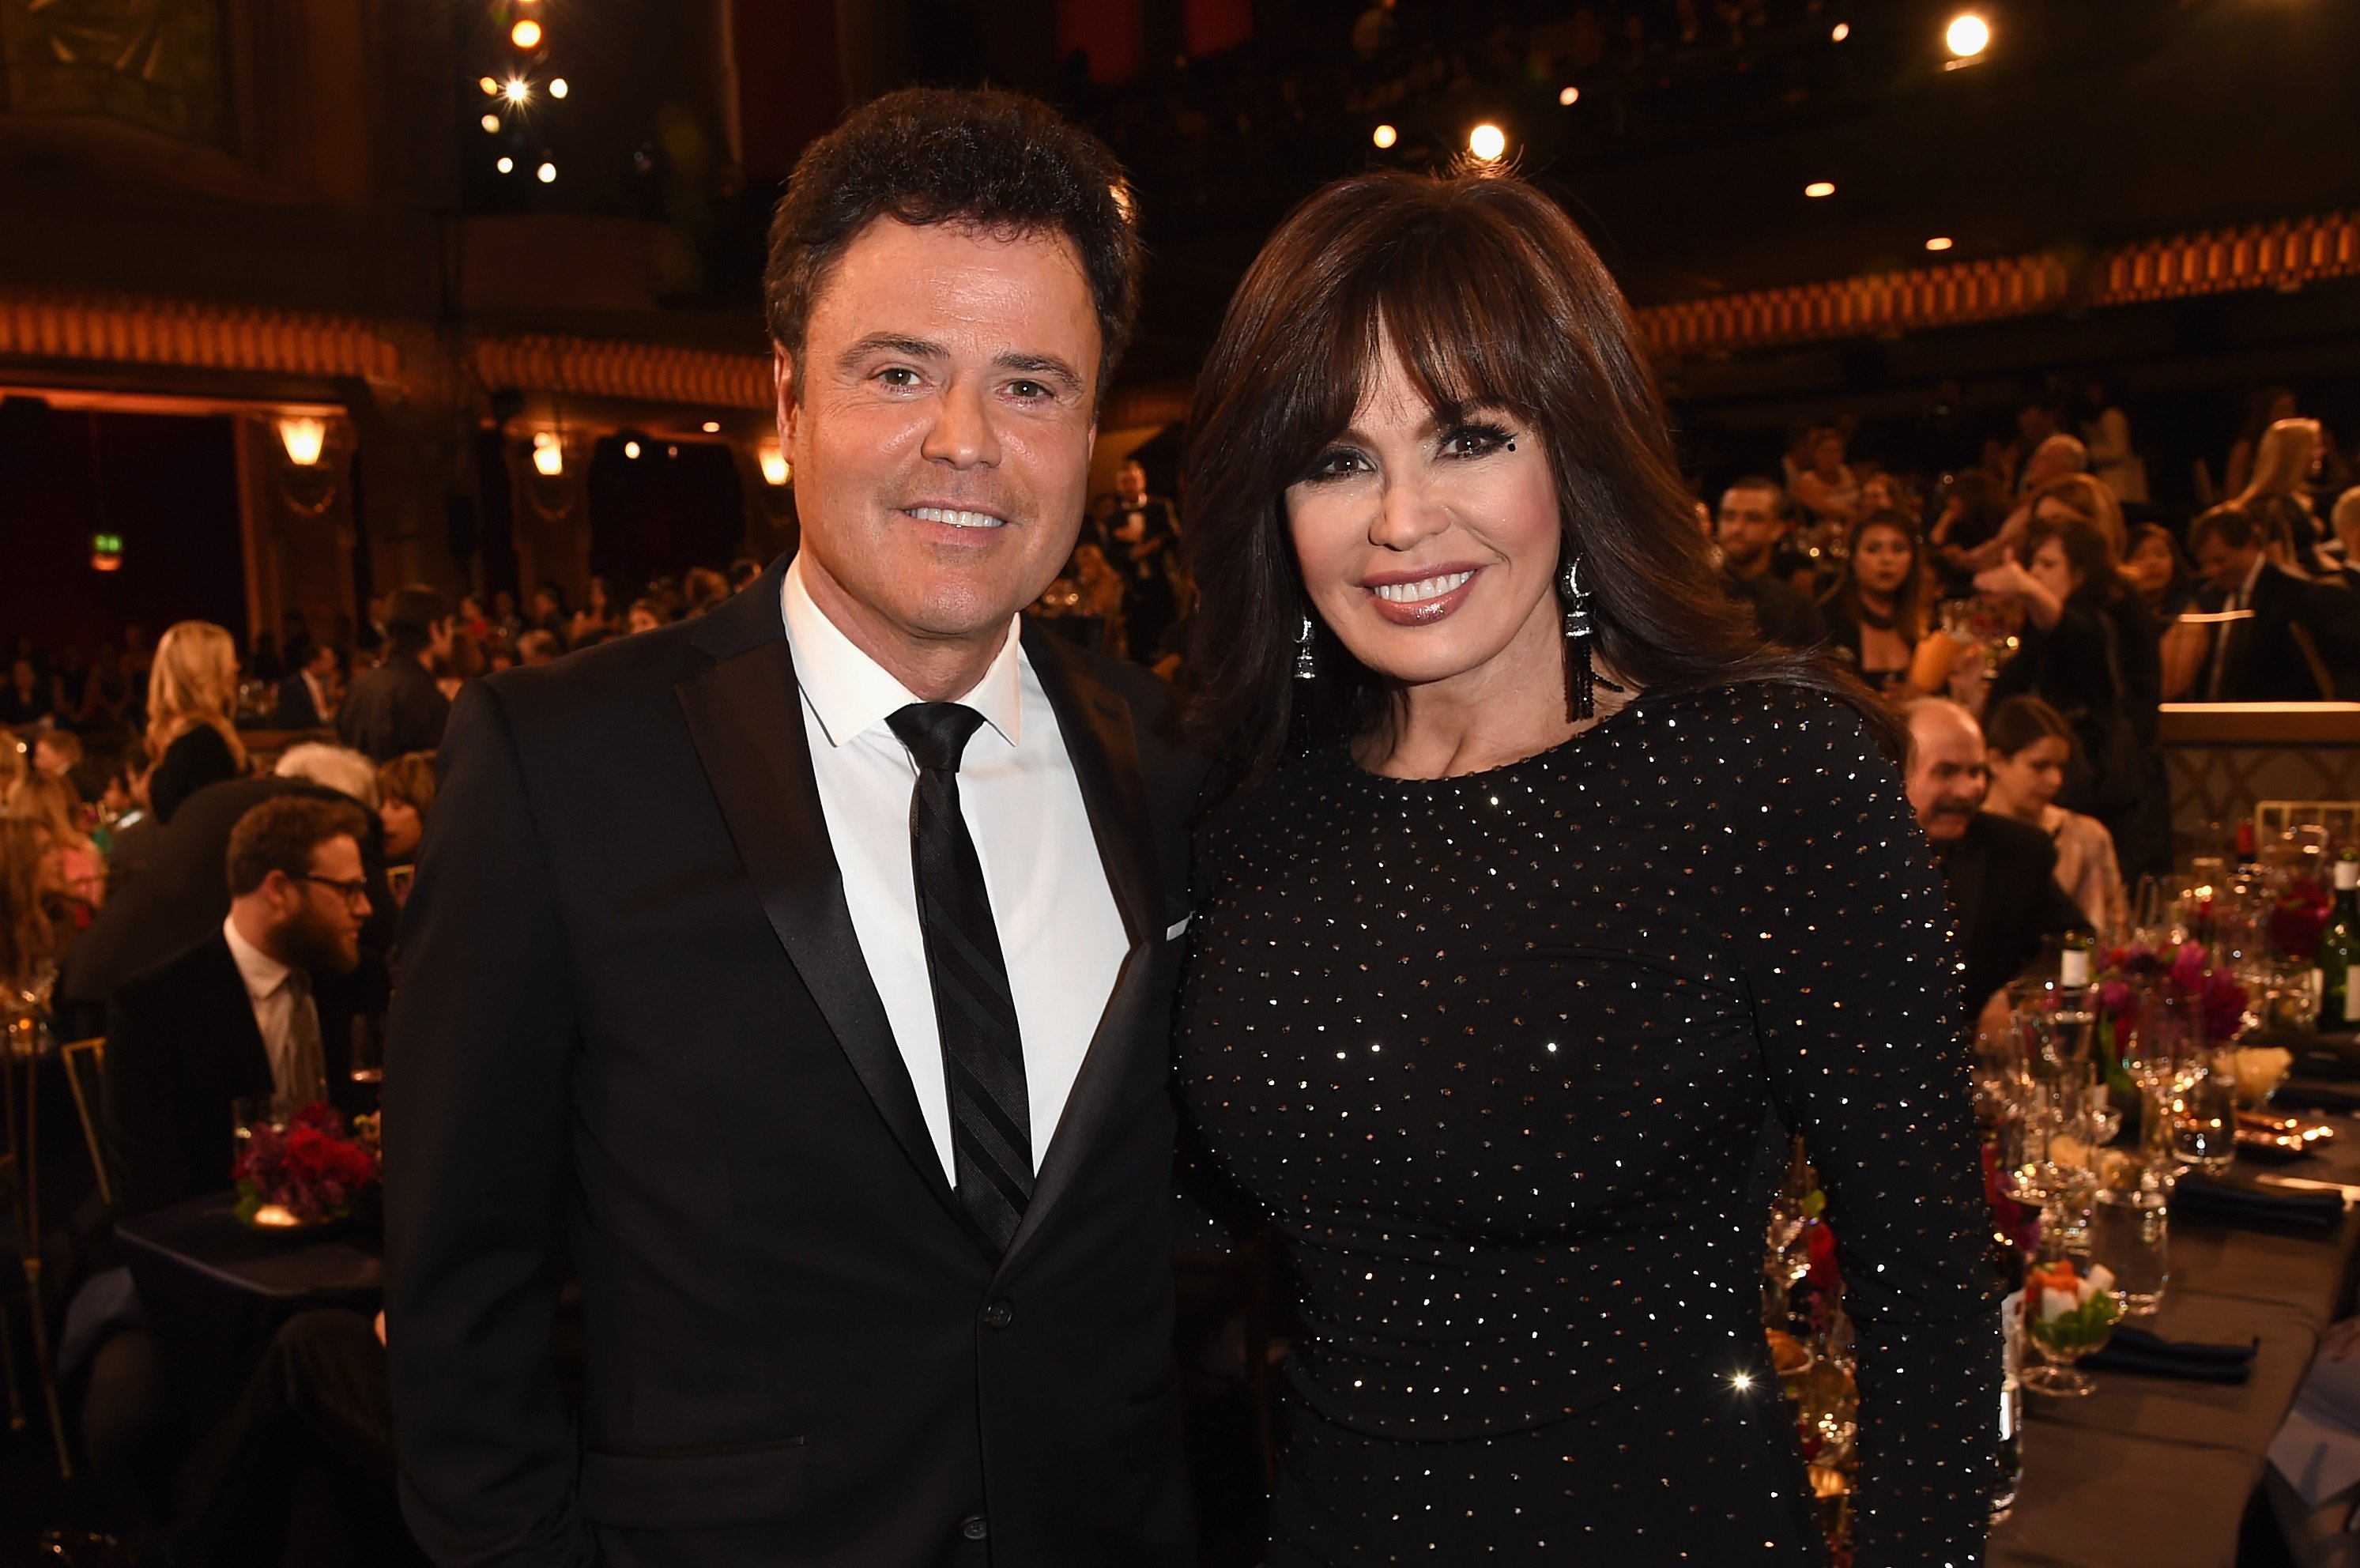 Donny Osmond and Marie Osmond attend the 2015 TV Land Awards on April 11, 2015, in Beverly Hills, California. | Source: Getty Images.